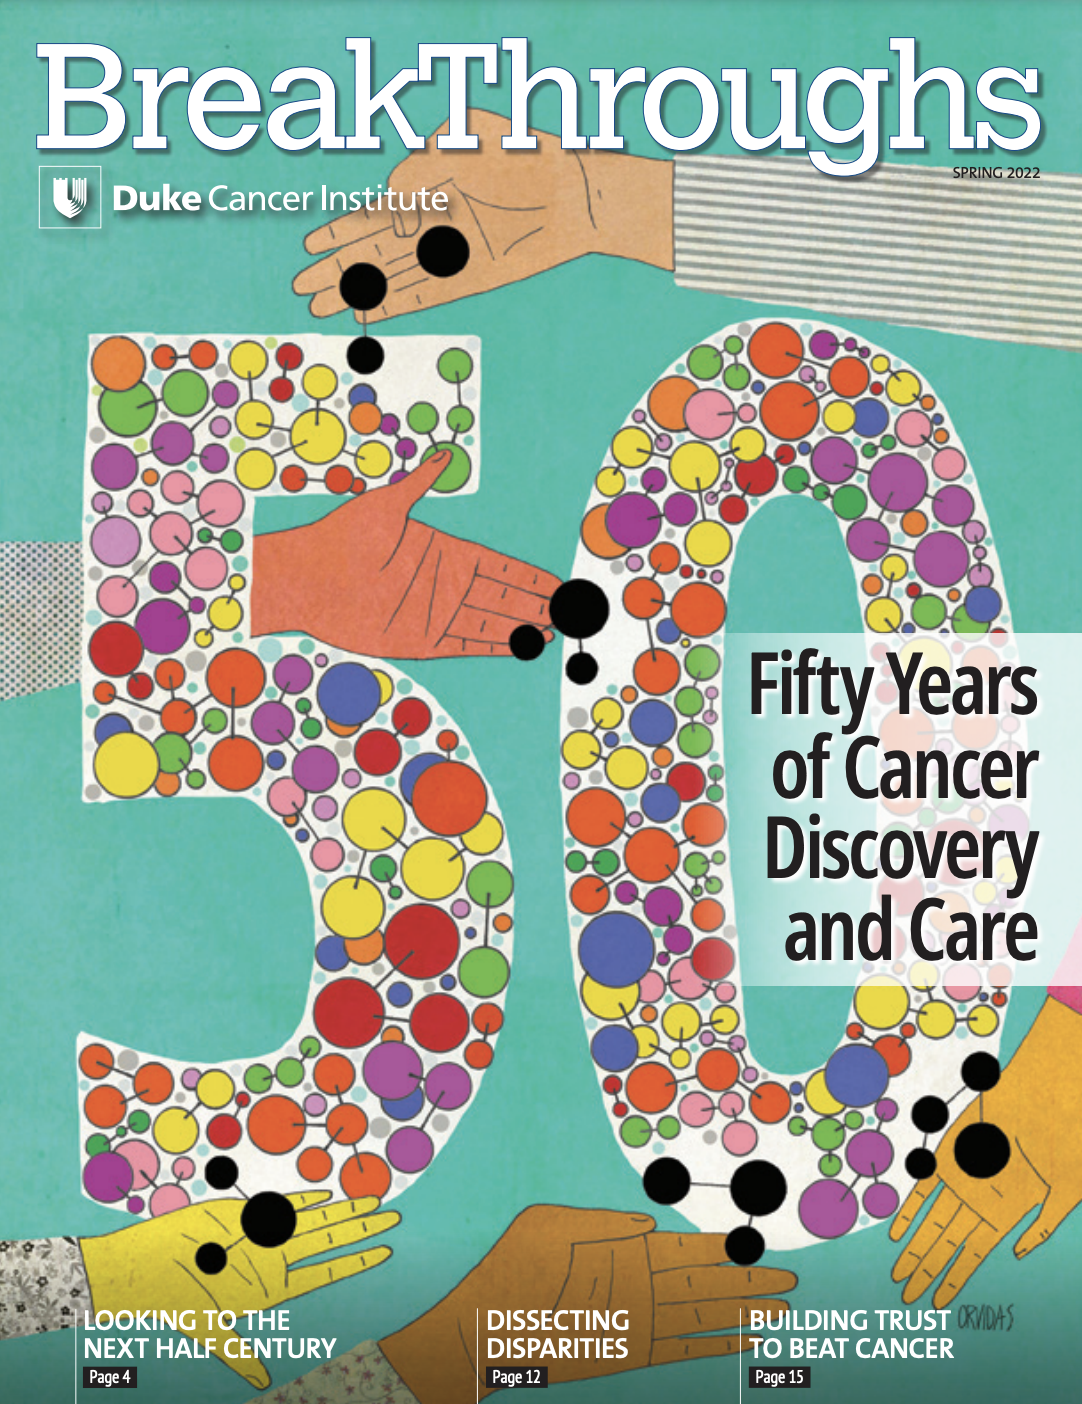 Breakhroughs magazine cover shows 50 years of cancer discovery and care